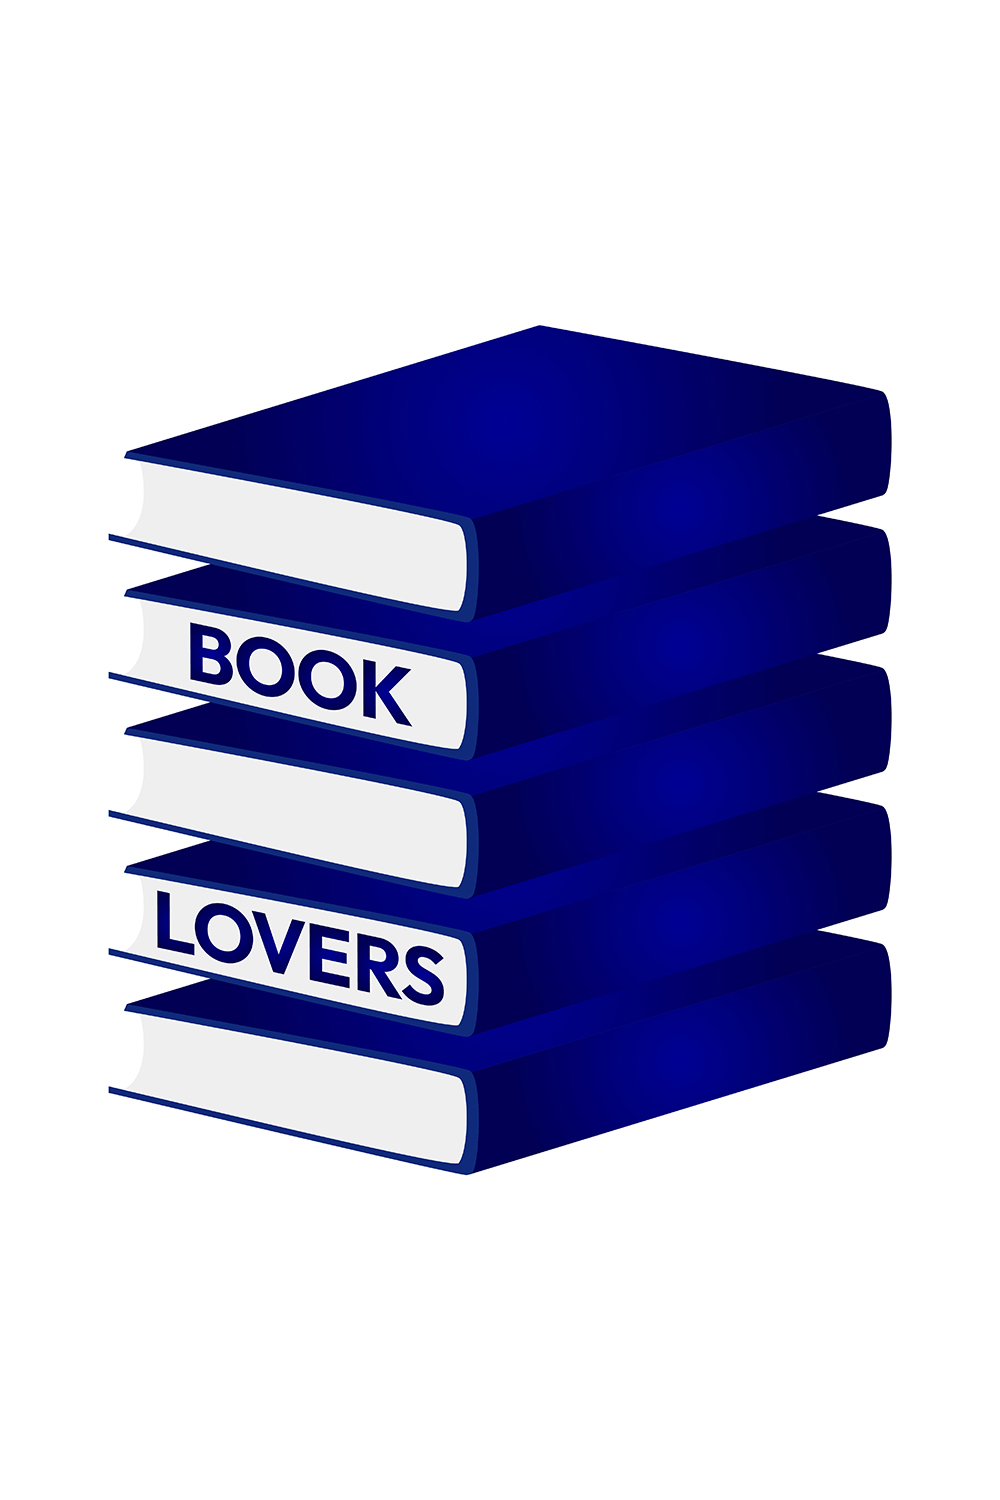 Book lovers, book lovers day 2 templates pinterest preview image.